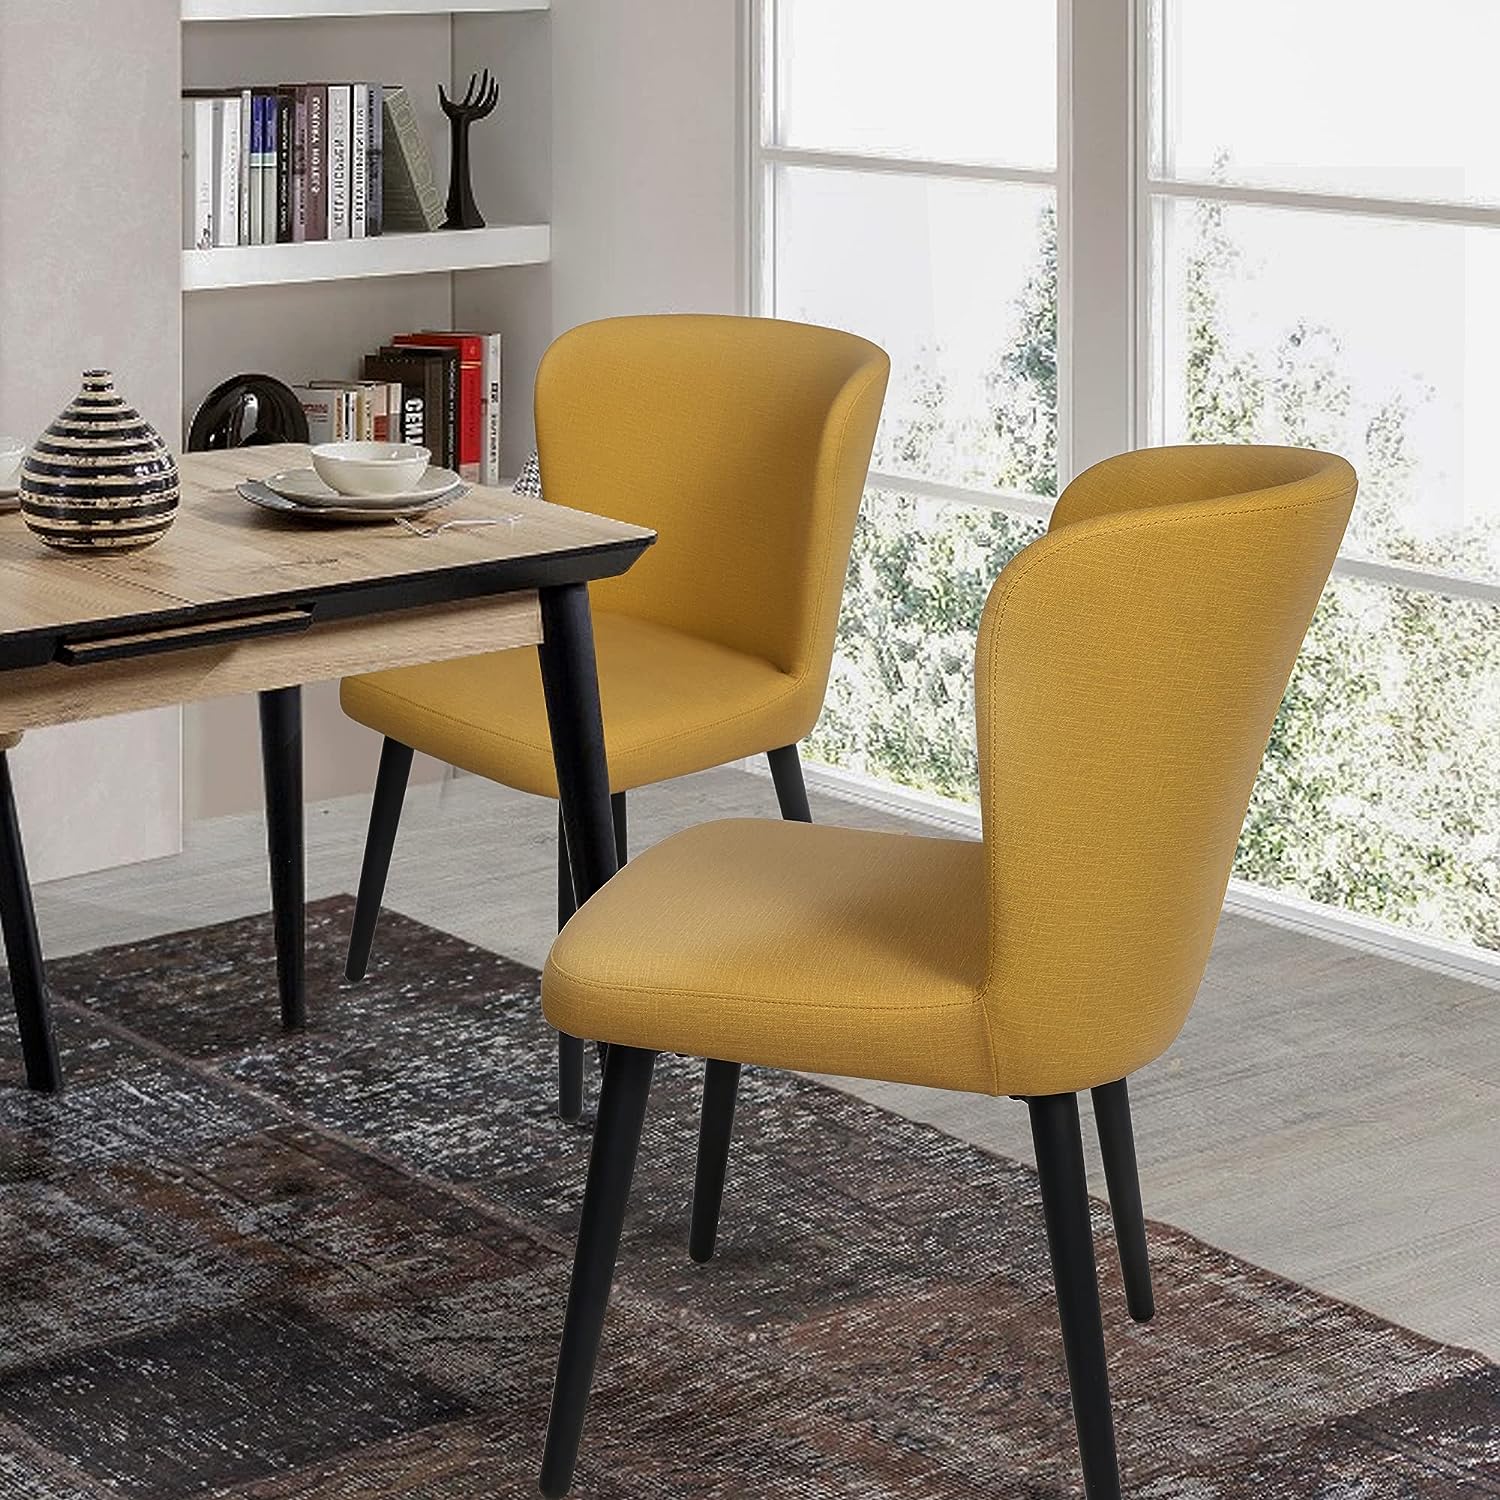 Set of 2 Dining Room Chairs Upholstered Side Chairs with Soft PU Leather Seat Backrest, Yellow